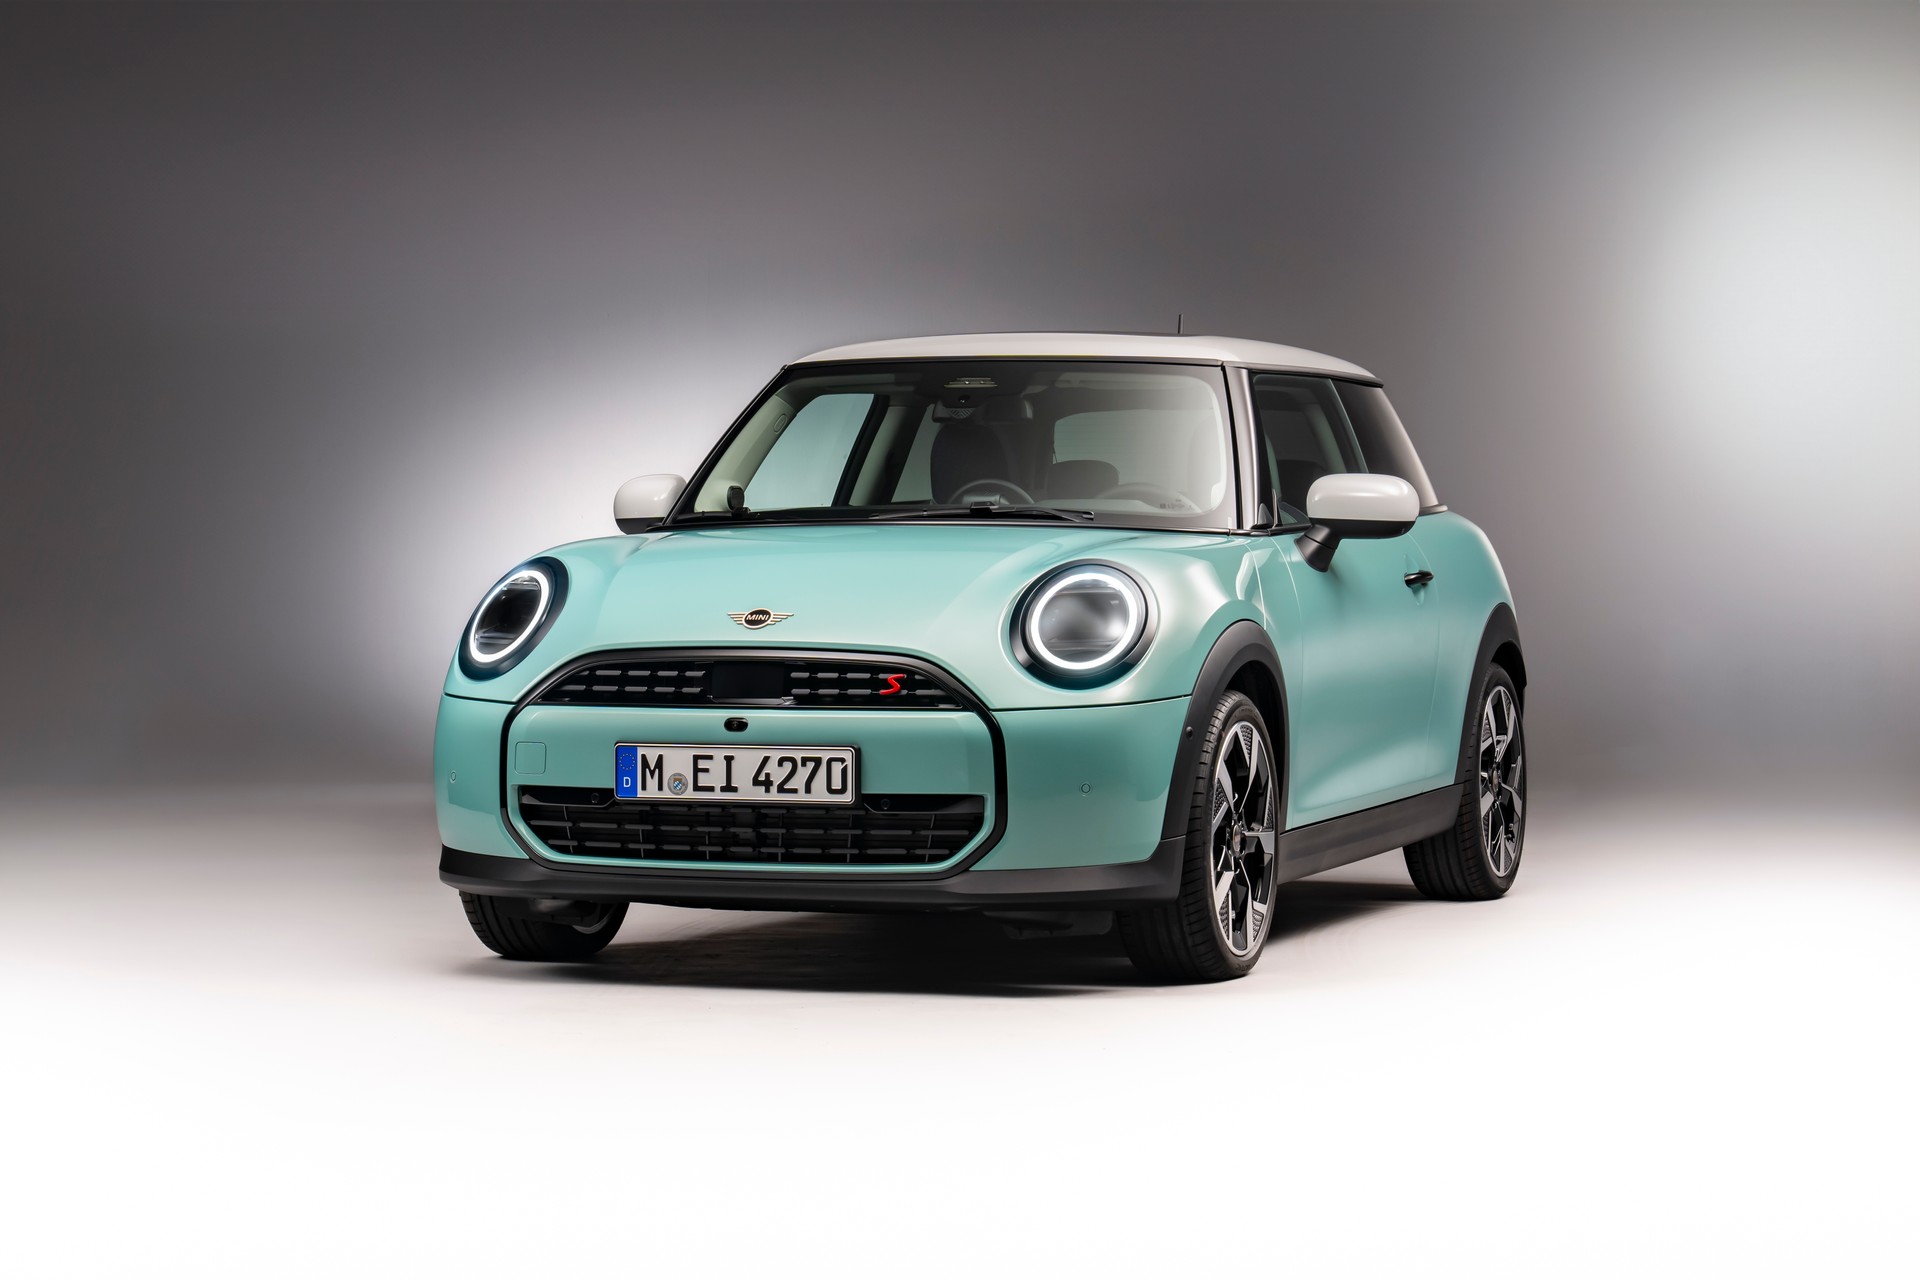 The new MINI Cooper, now also equipped with petrol engines